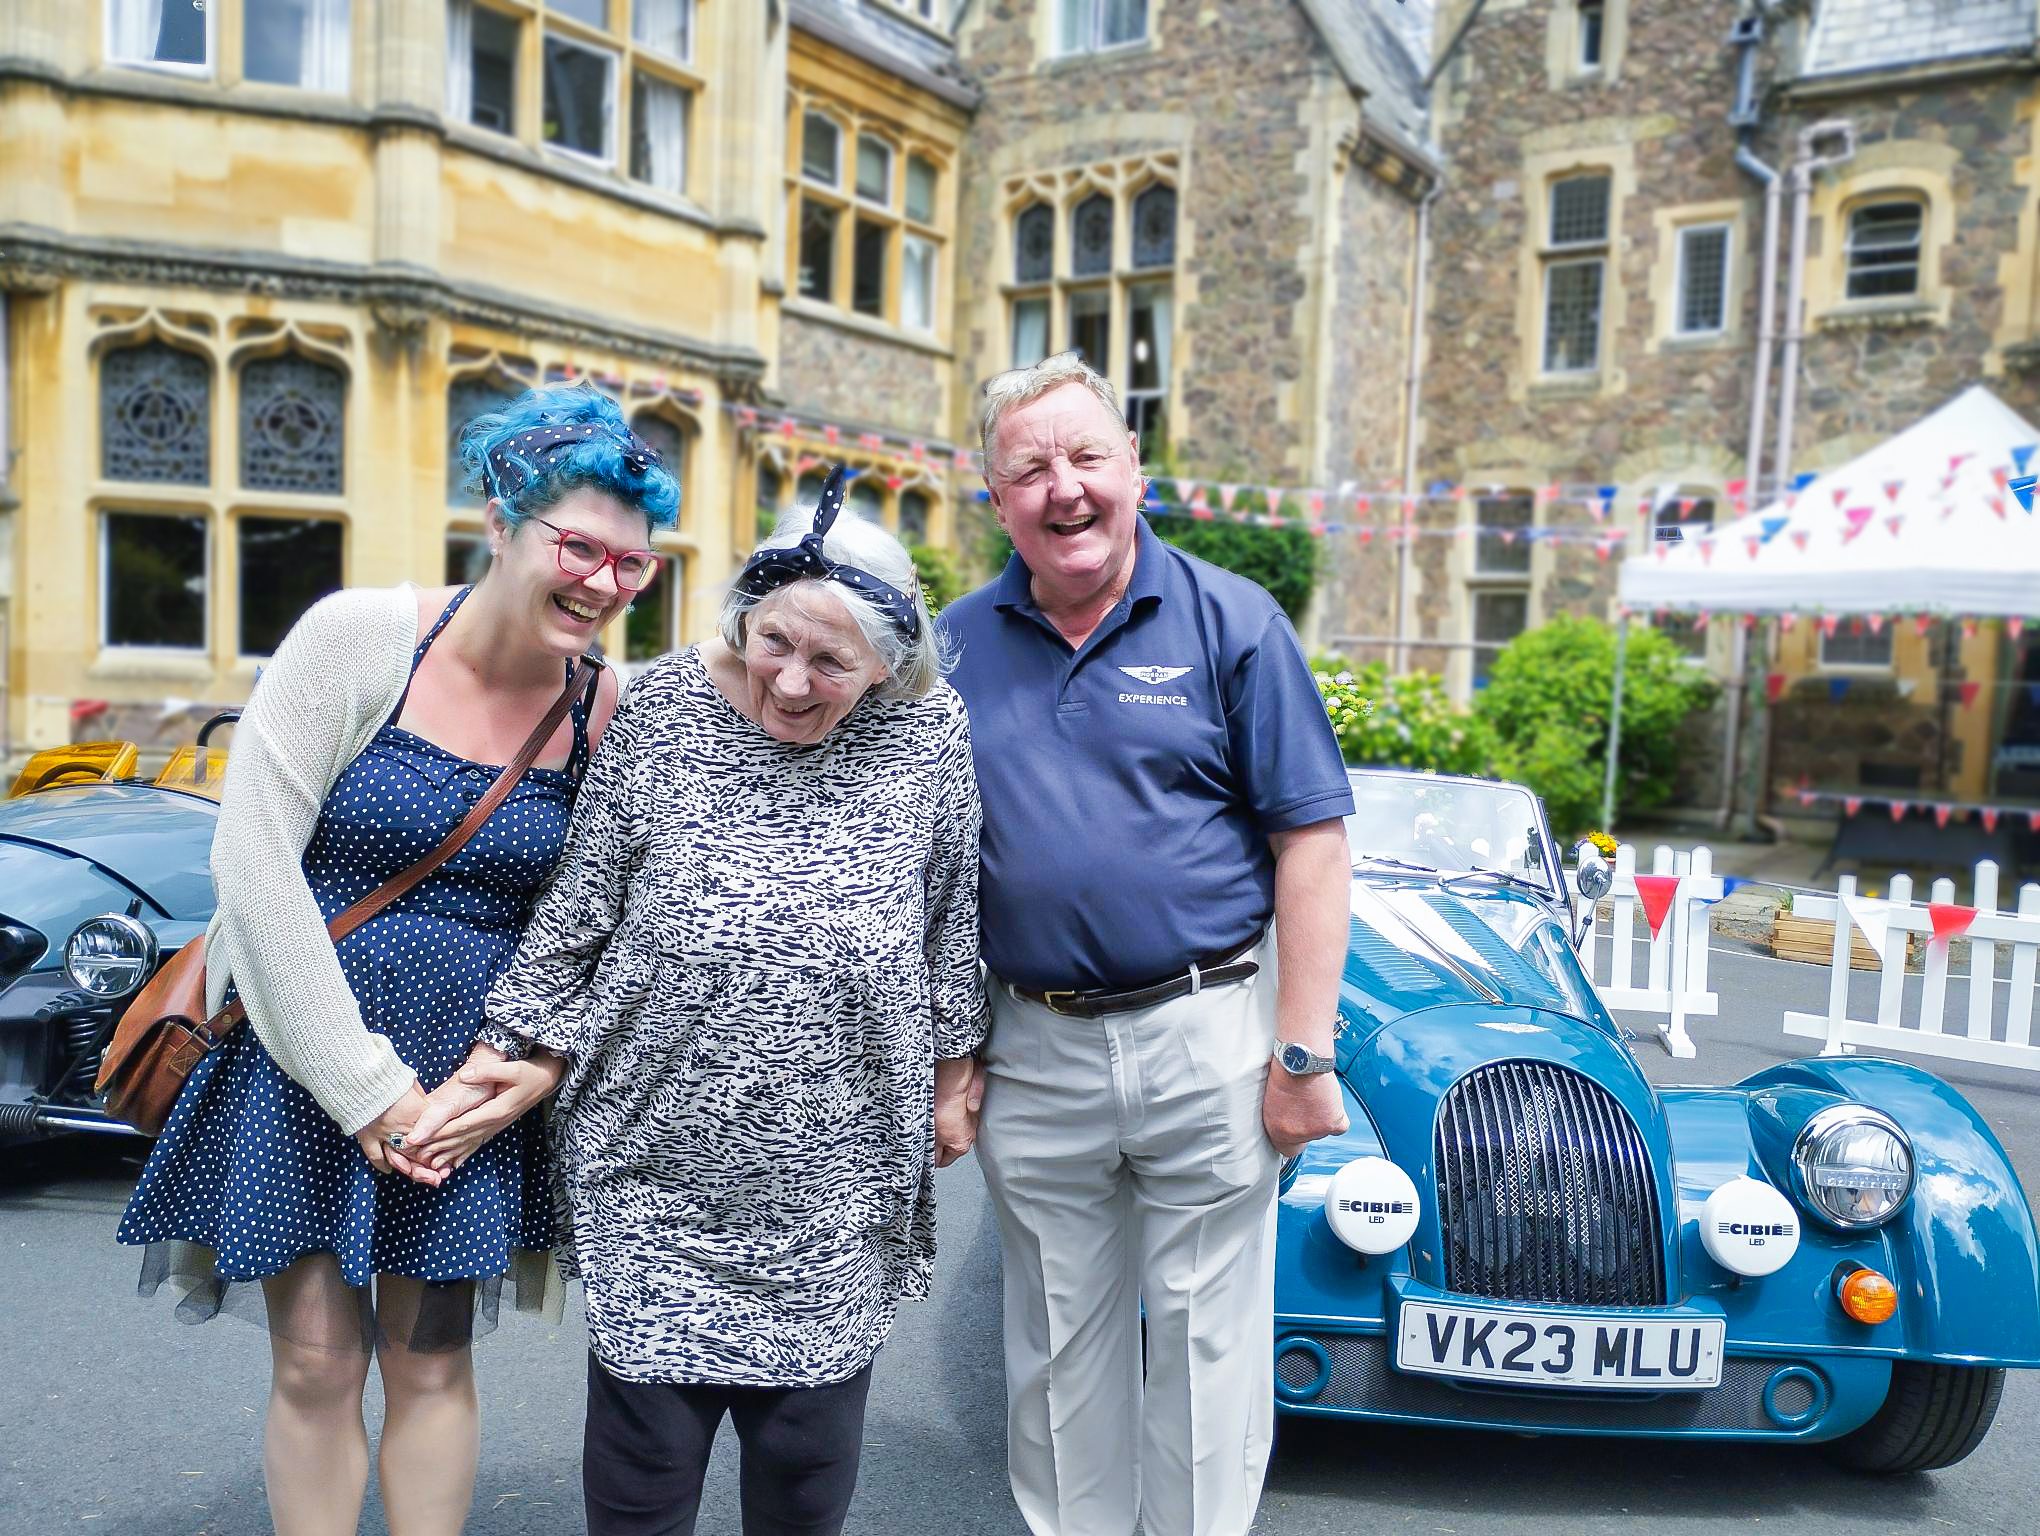 A resident and staff members alongside classic cars.